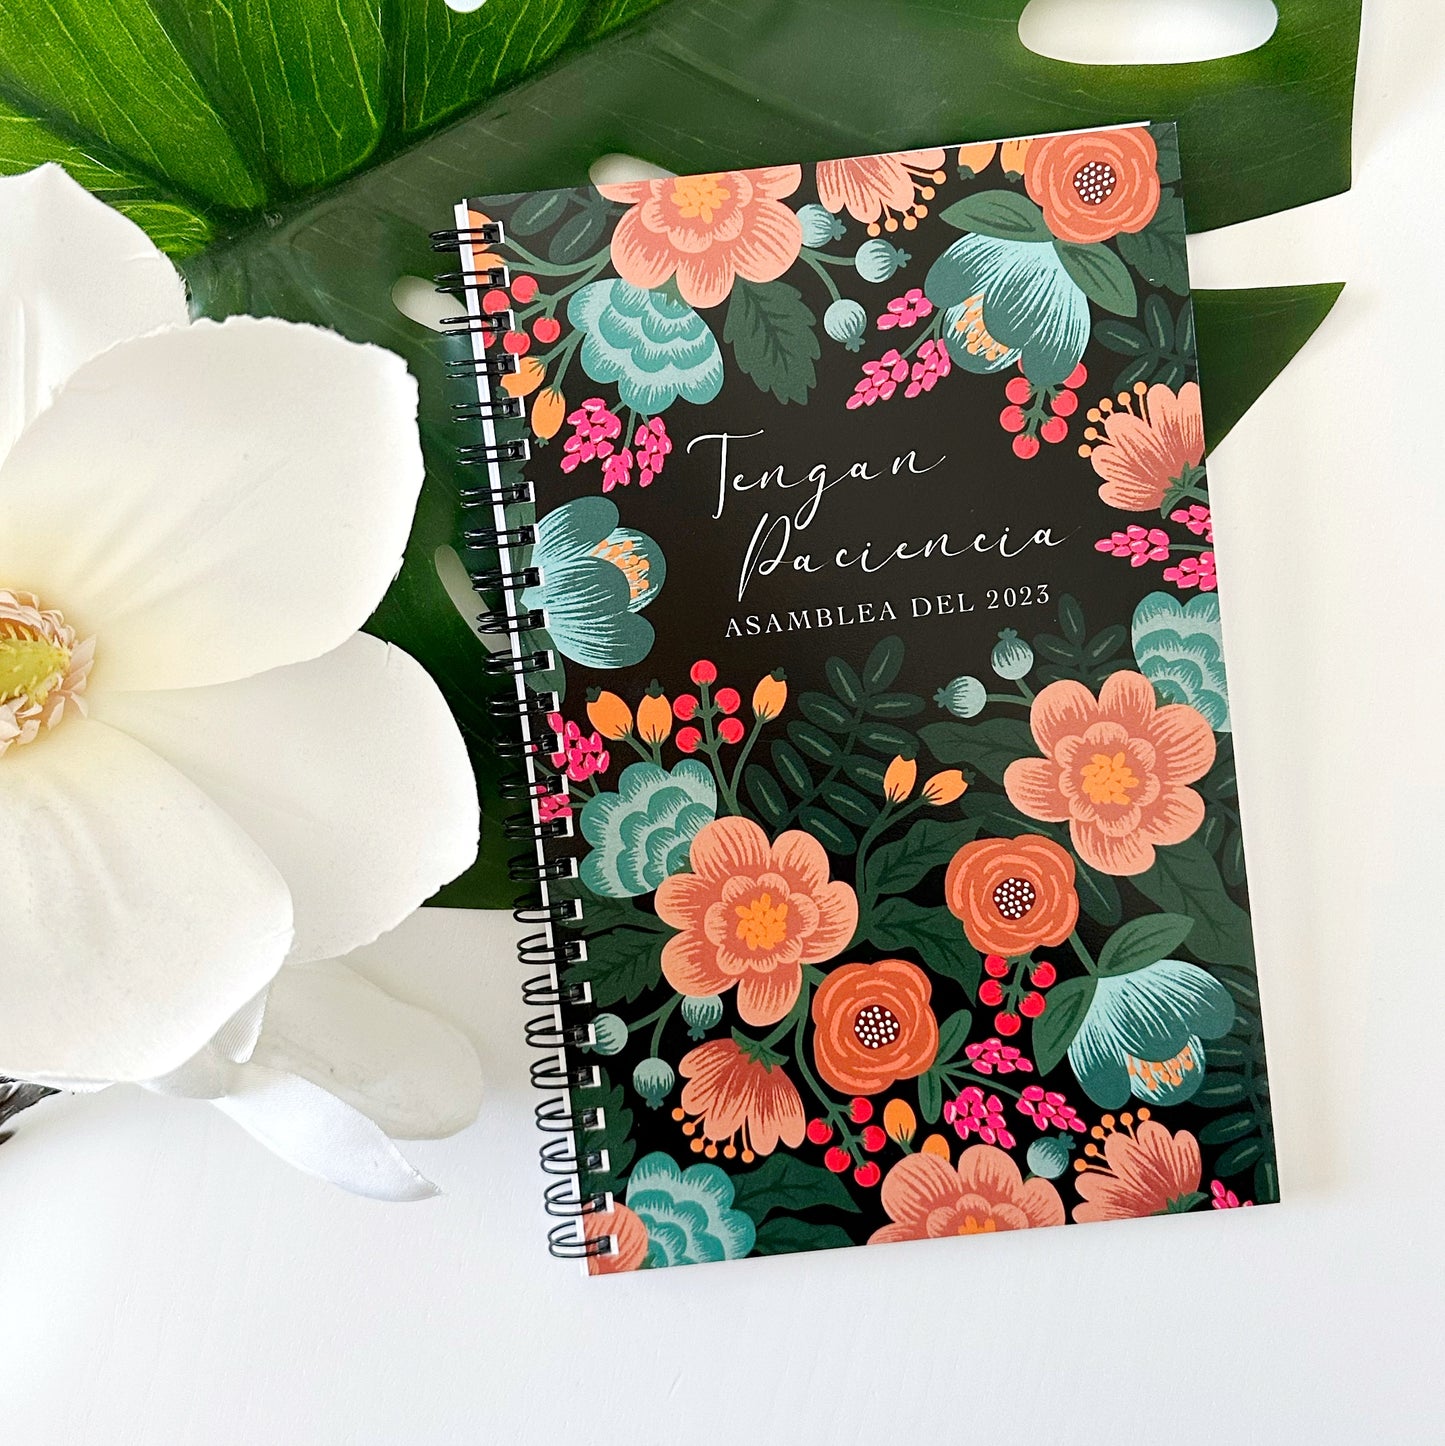 2023 Exercise Patience Floral Regional Convention Notebook